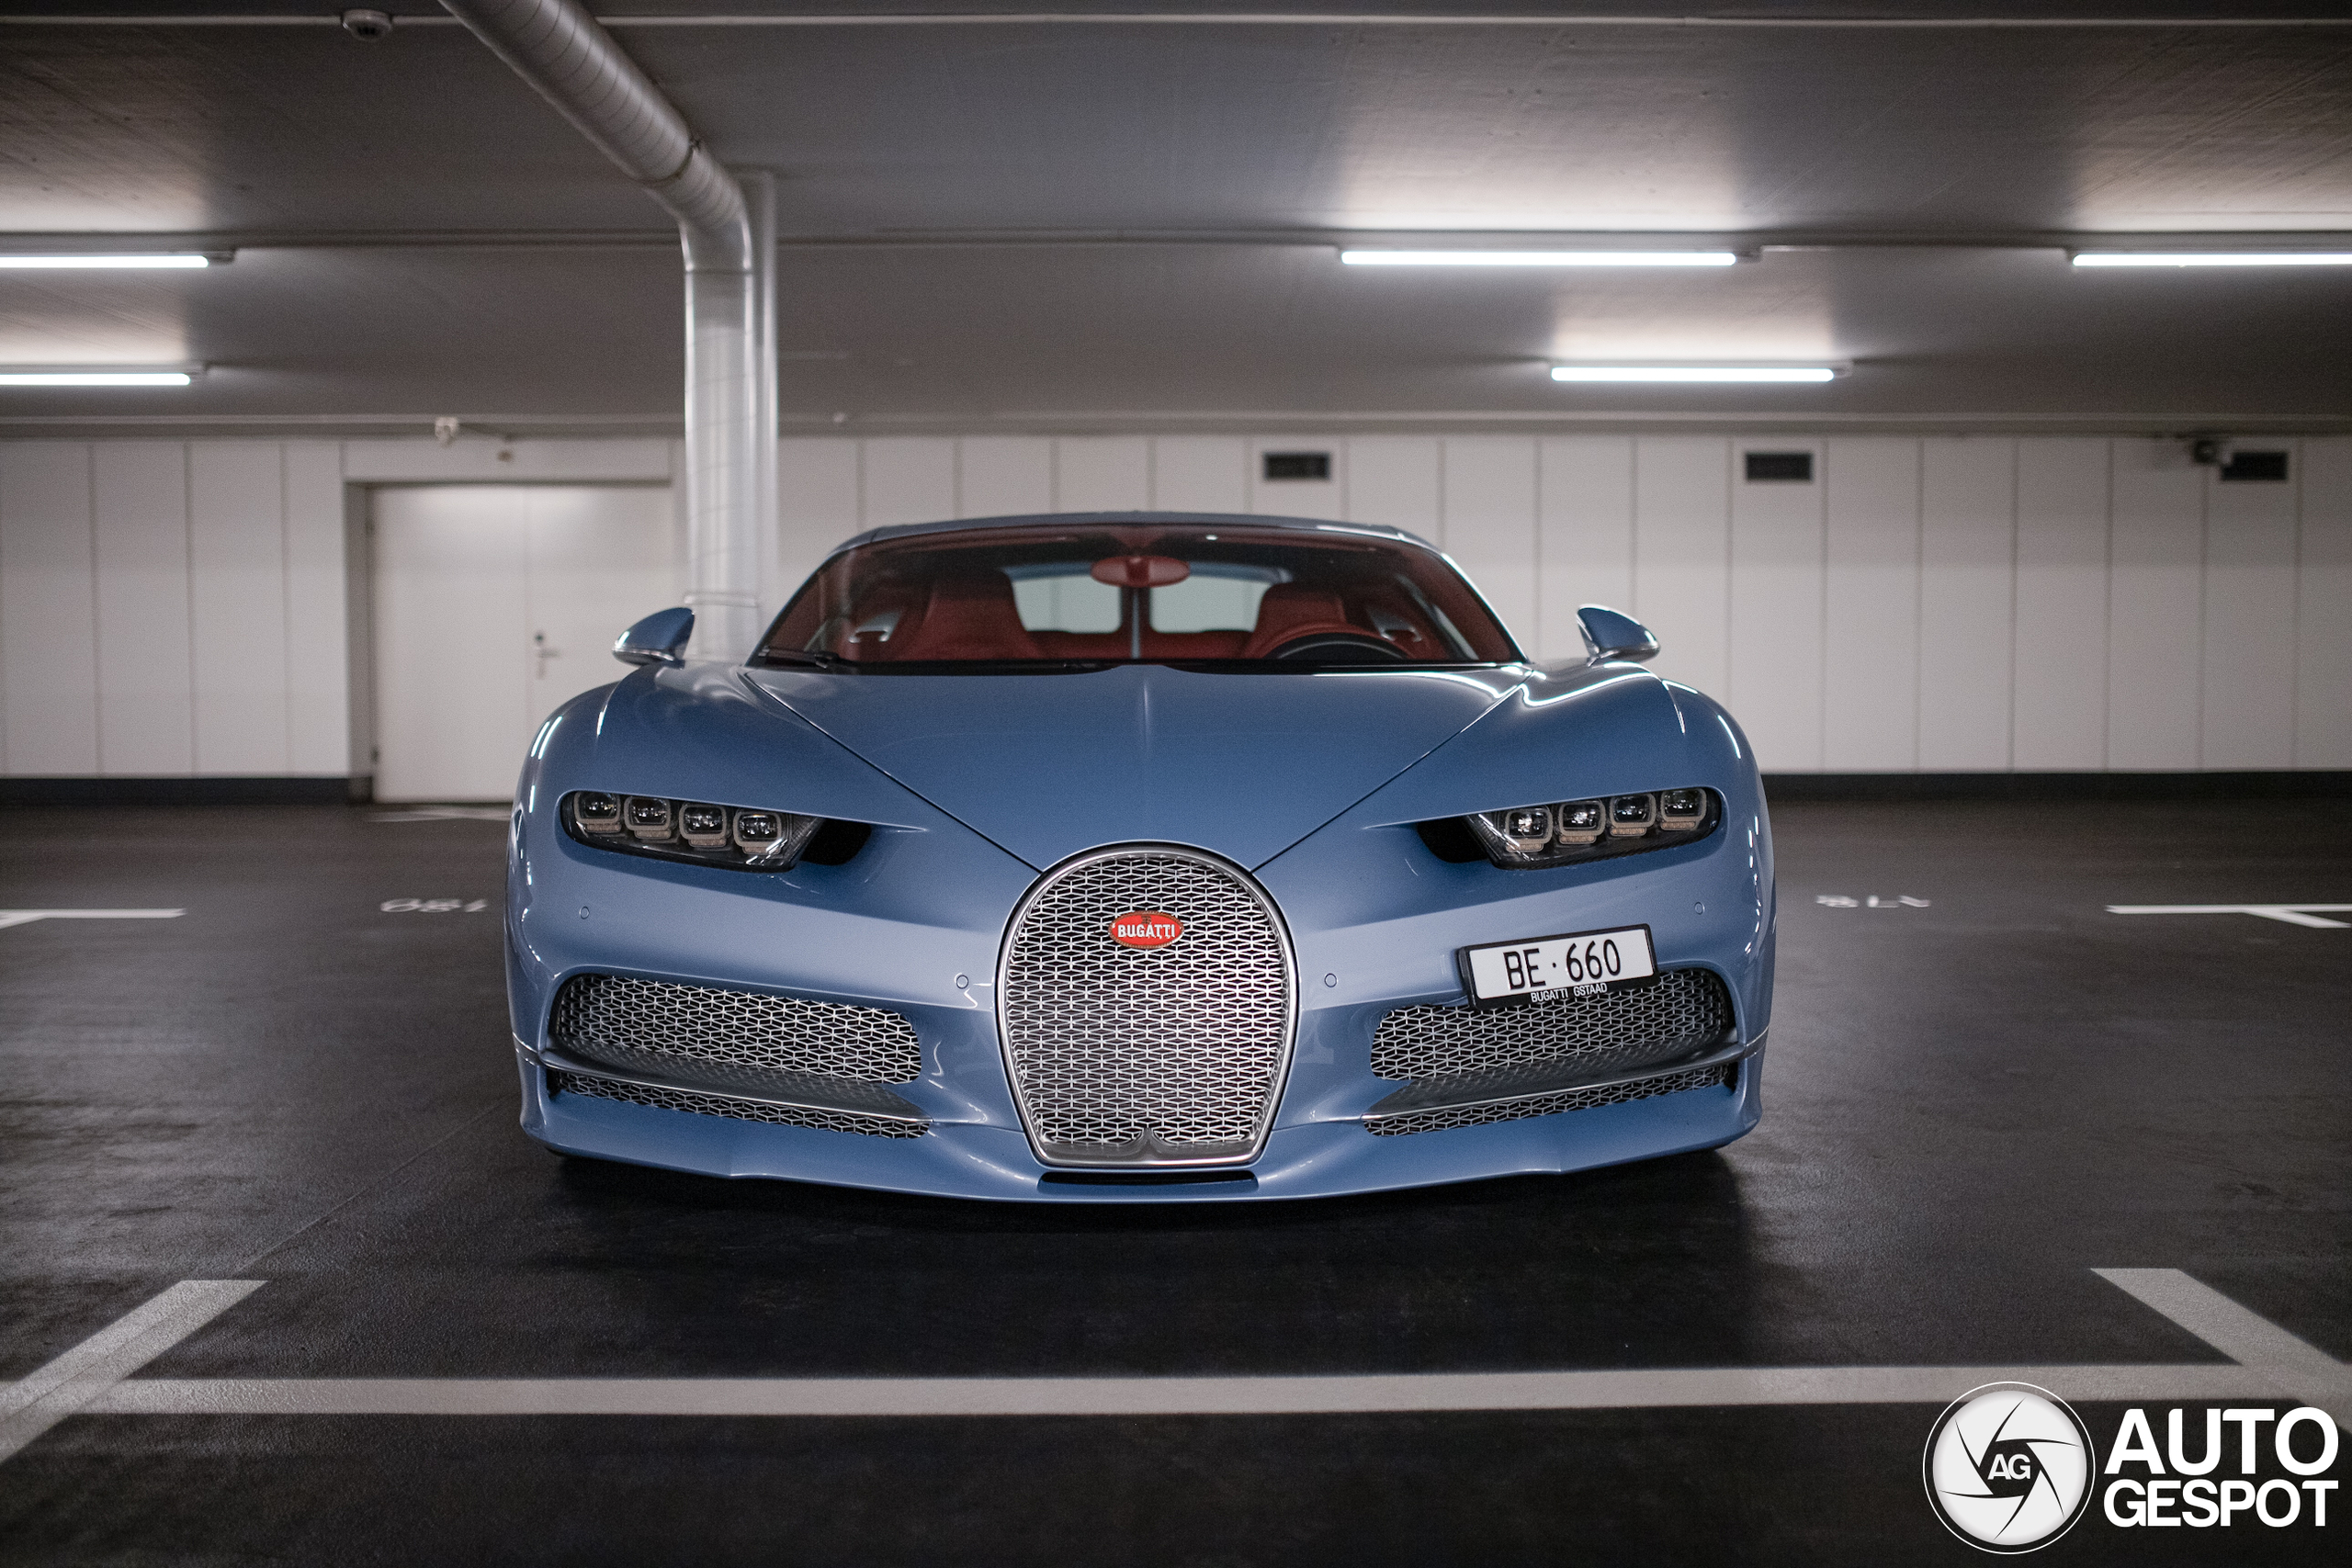 It's not the first time a hypercar has been parked in this garage.